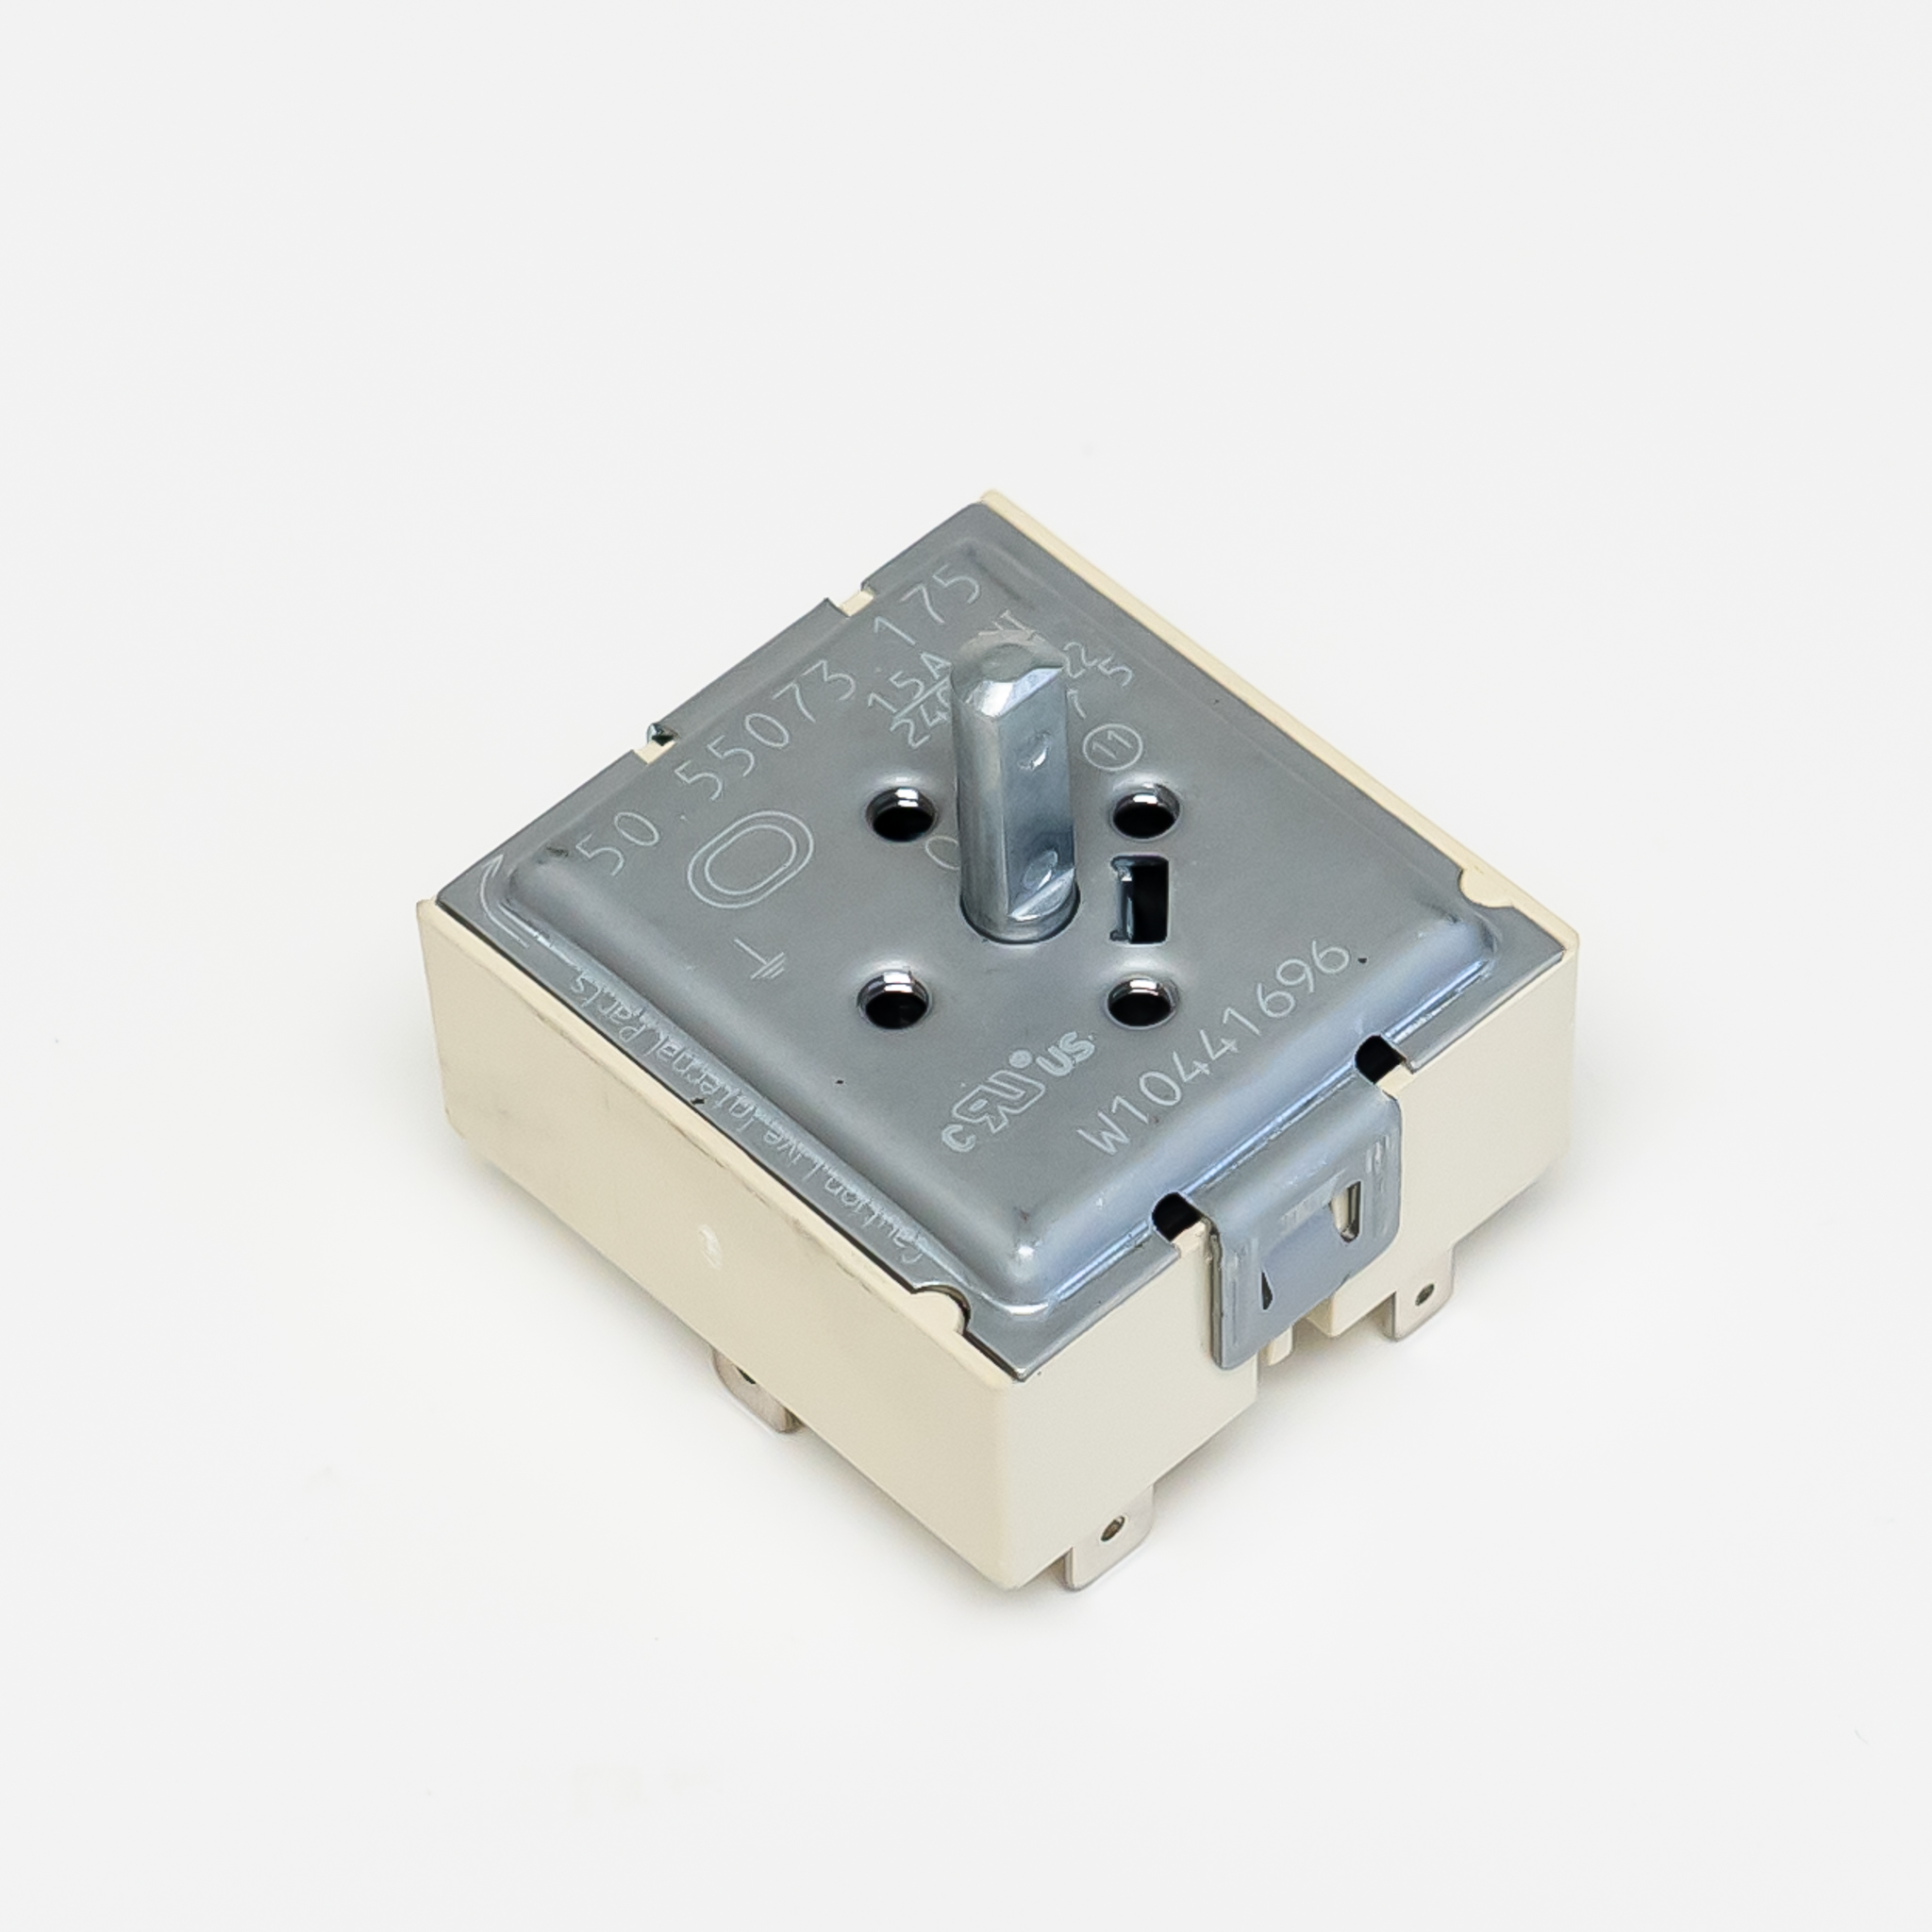 Choice Part W10441696 Range Burner Infinite Switch Control for Whirlpool - image 1 of 4